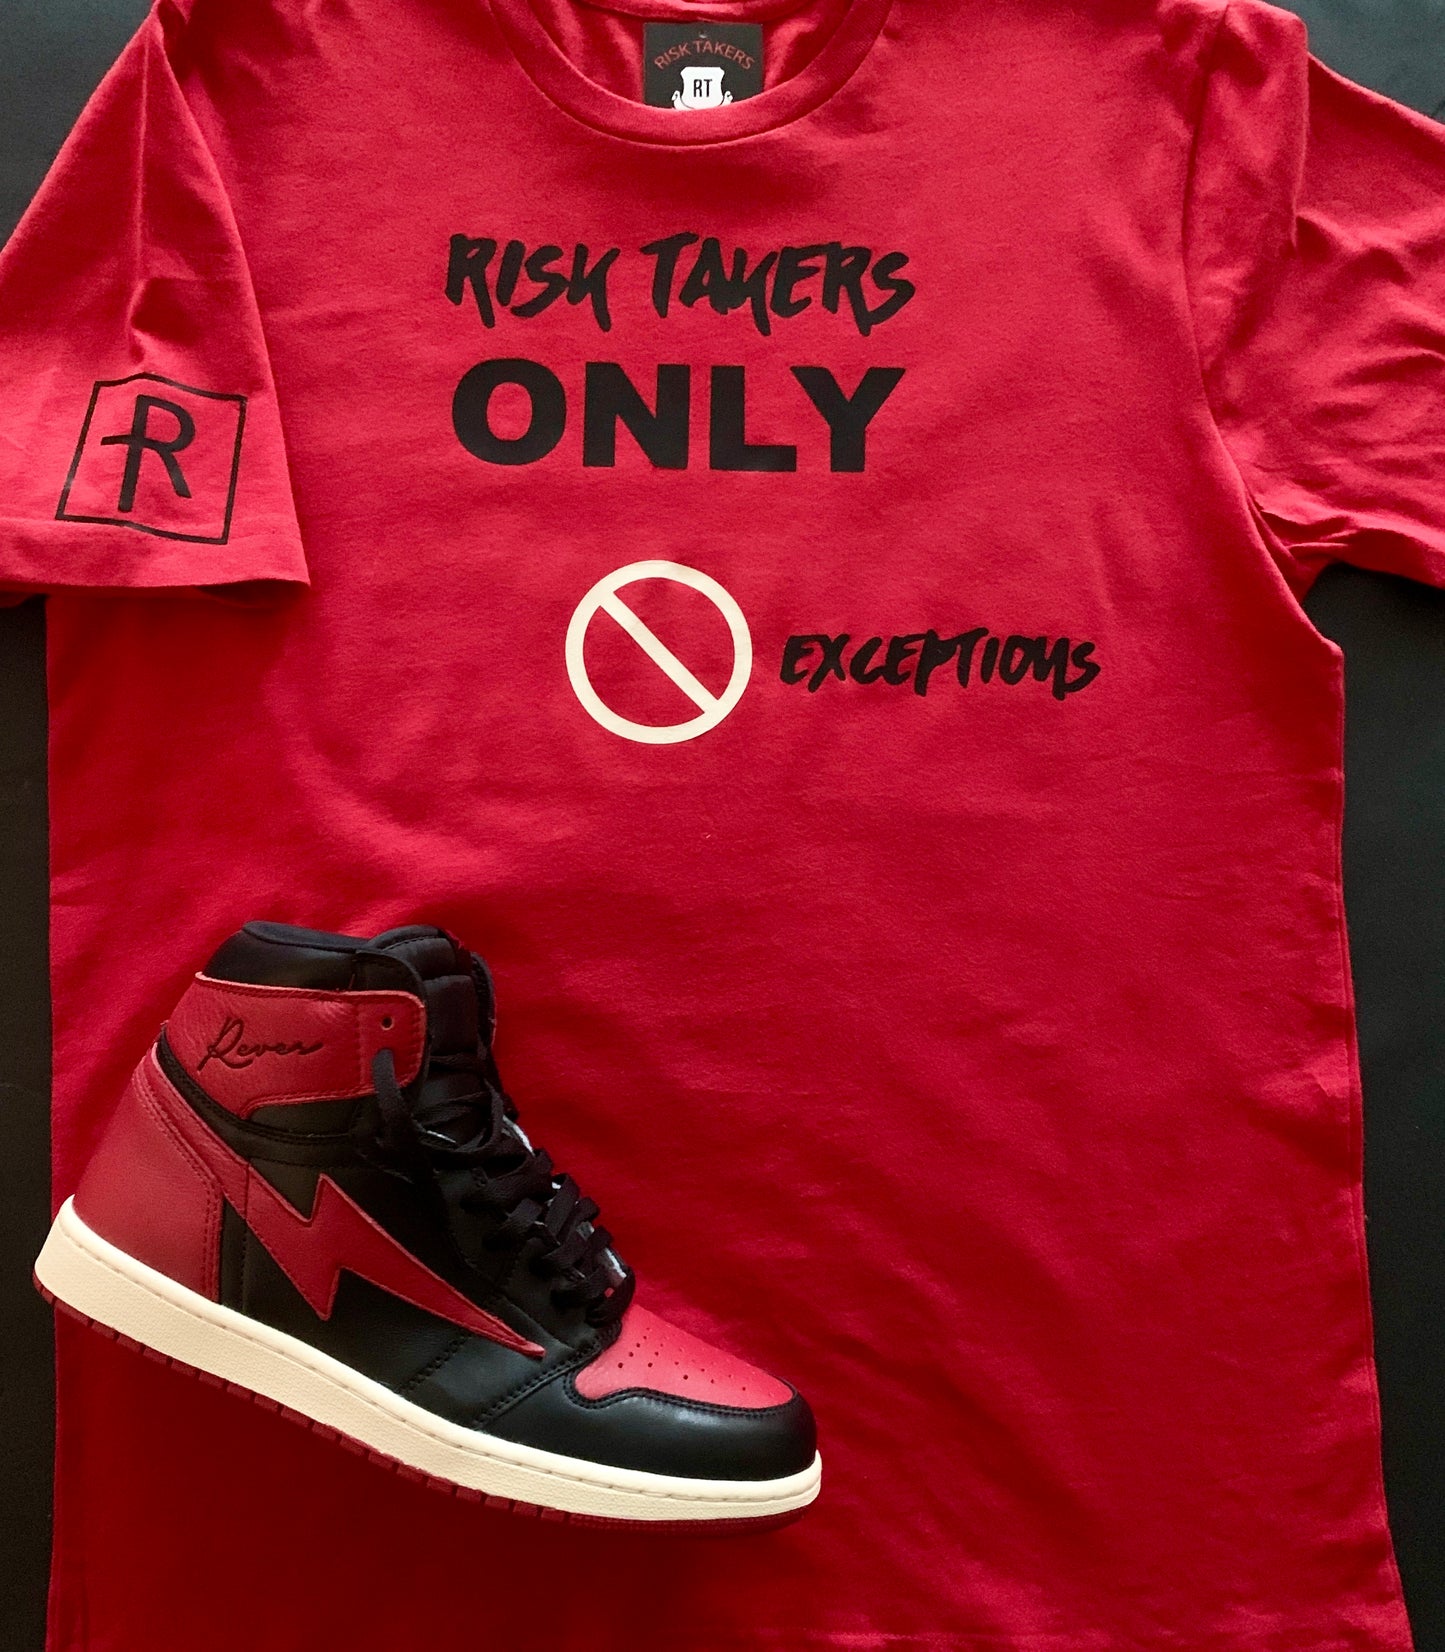 Red And Black Unisex RISK TAKERS ONLY Tee